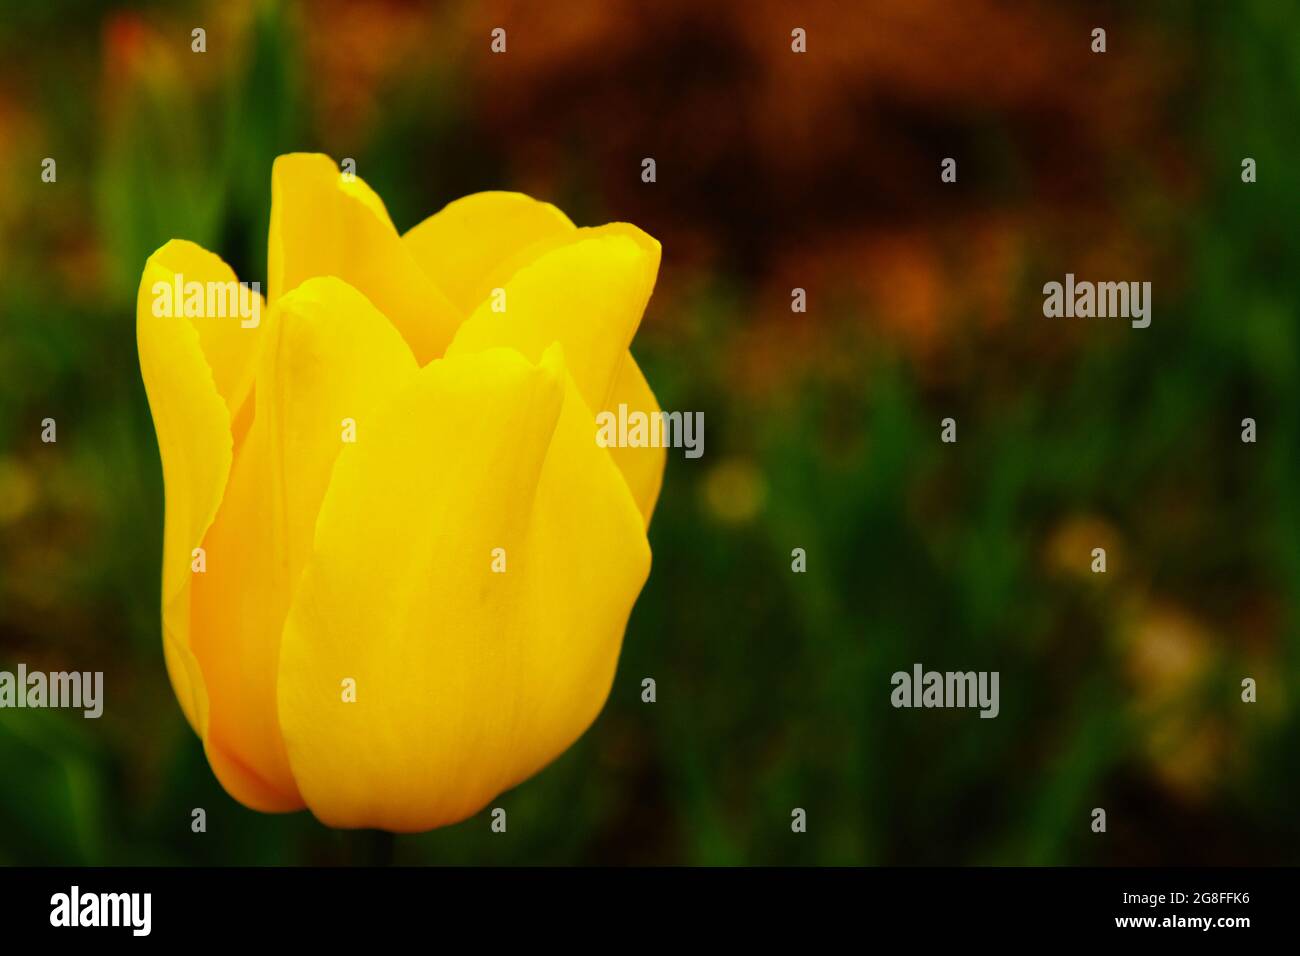 Yellow Tulip on blurred green background Stock Photo